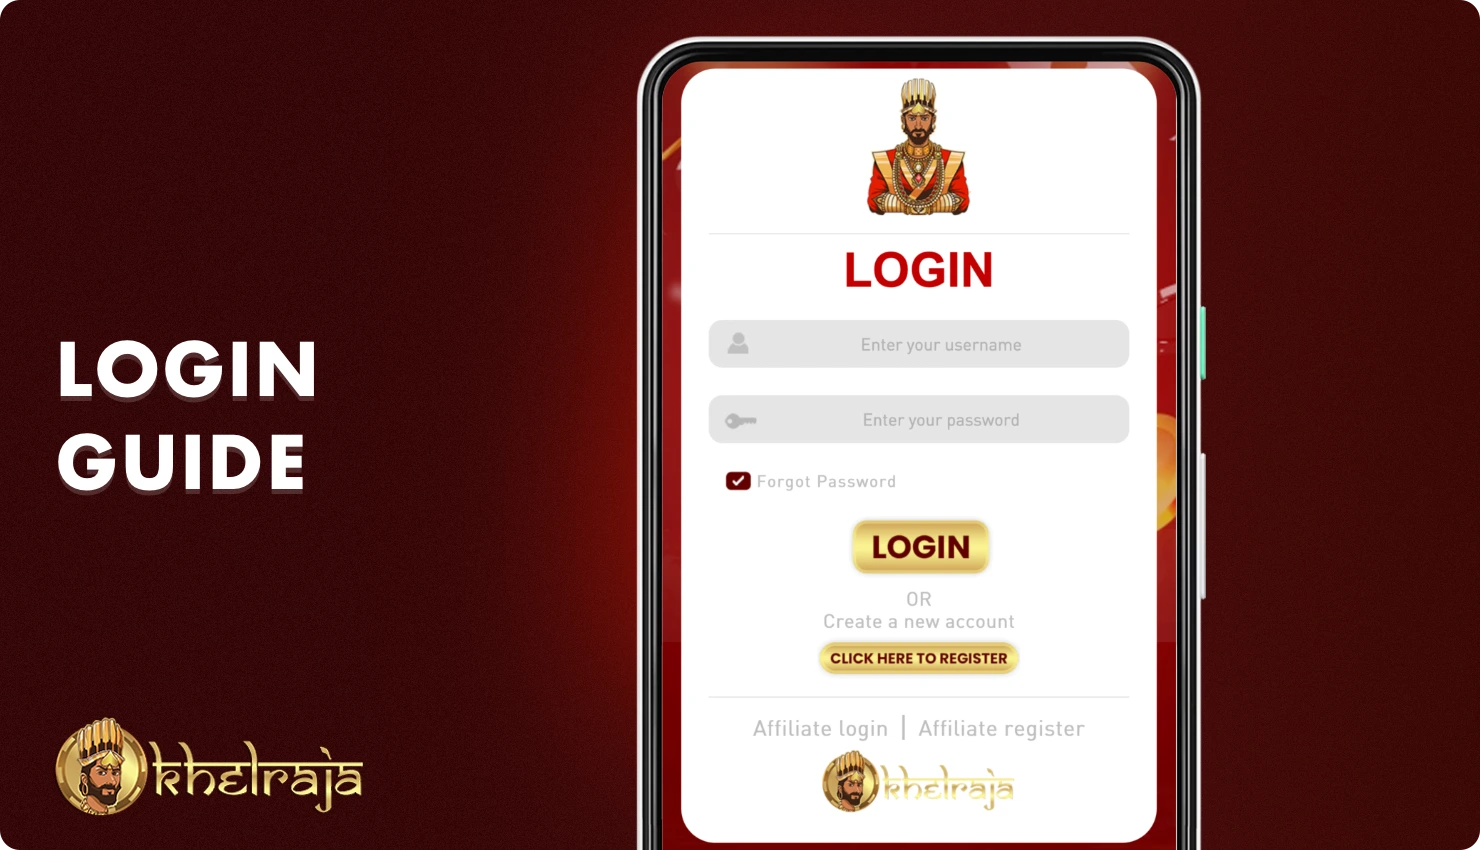 To log in to your Khelraja account, use the information provided during registration